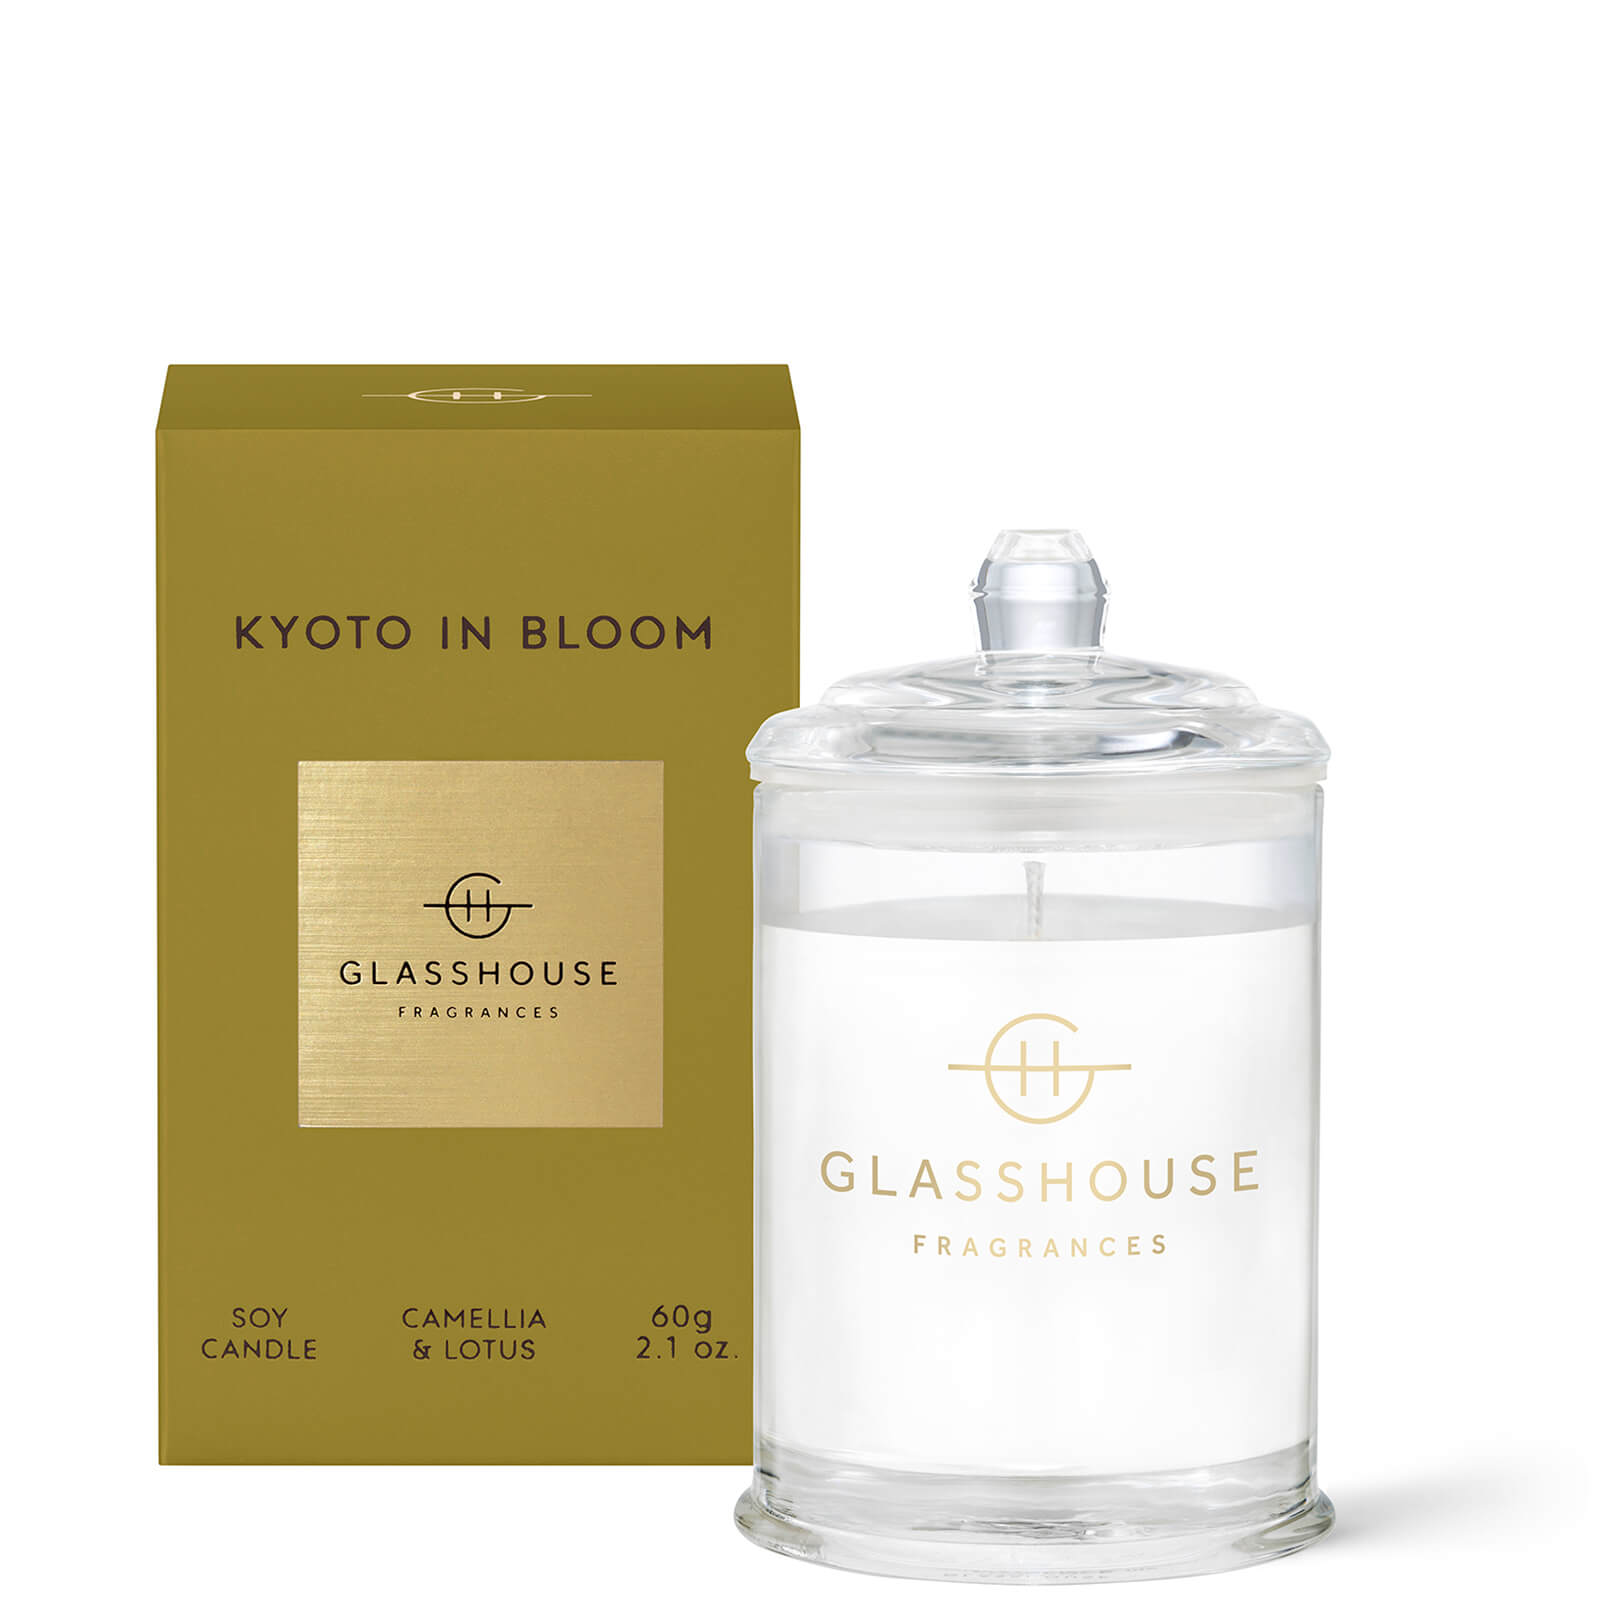 Glasshouse Fragrances Glasshouse Kyoto In Bloom Candle 60g. Worth $20